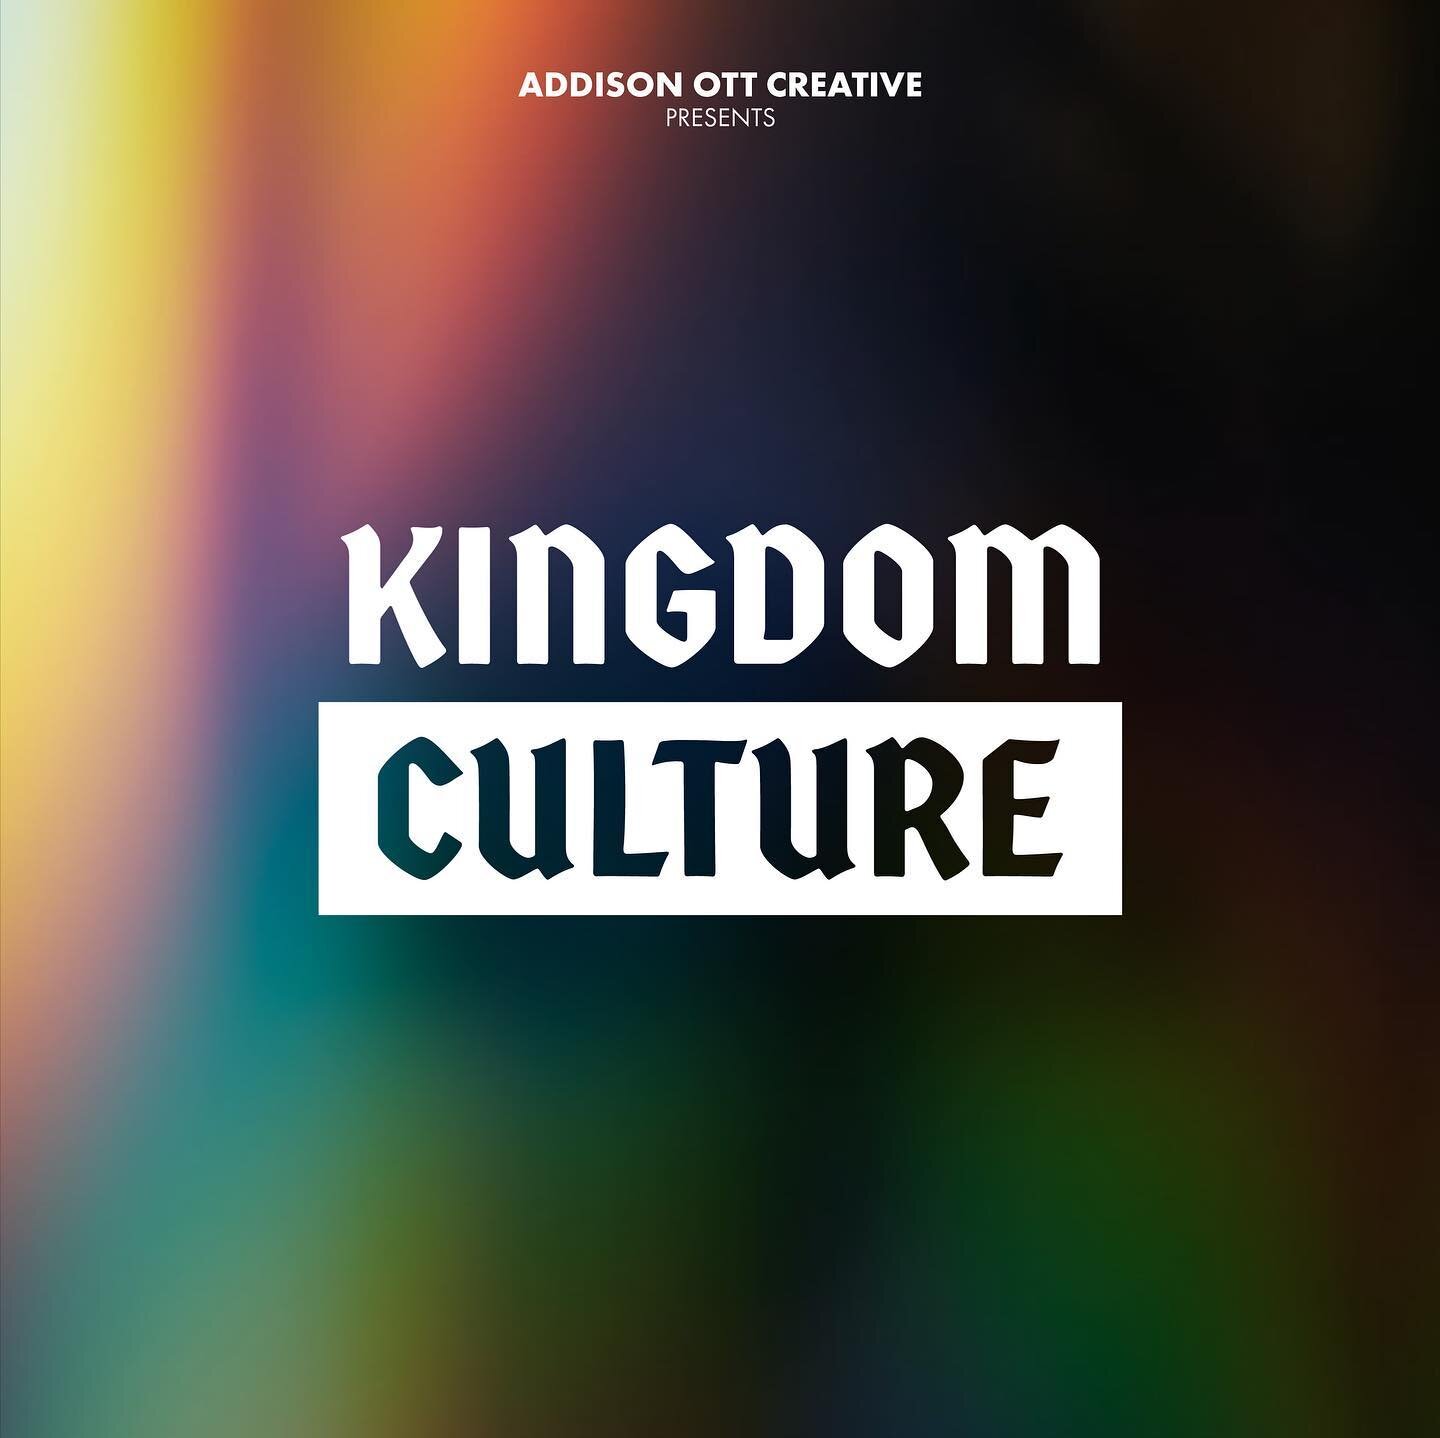 Friends, get ready for a brand new podcast focused on the words of Jesus.

Season 1 begins January 2022.

#KingdomCulturePodcast